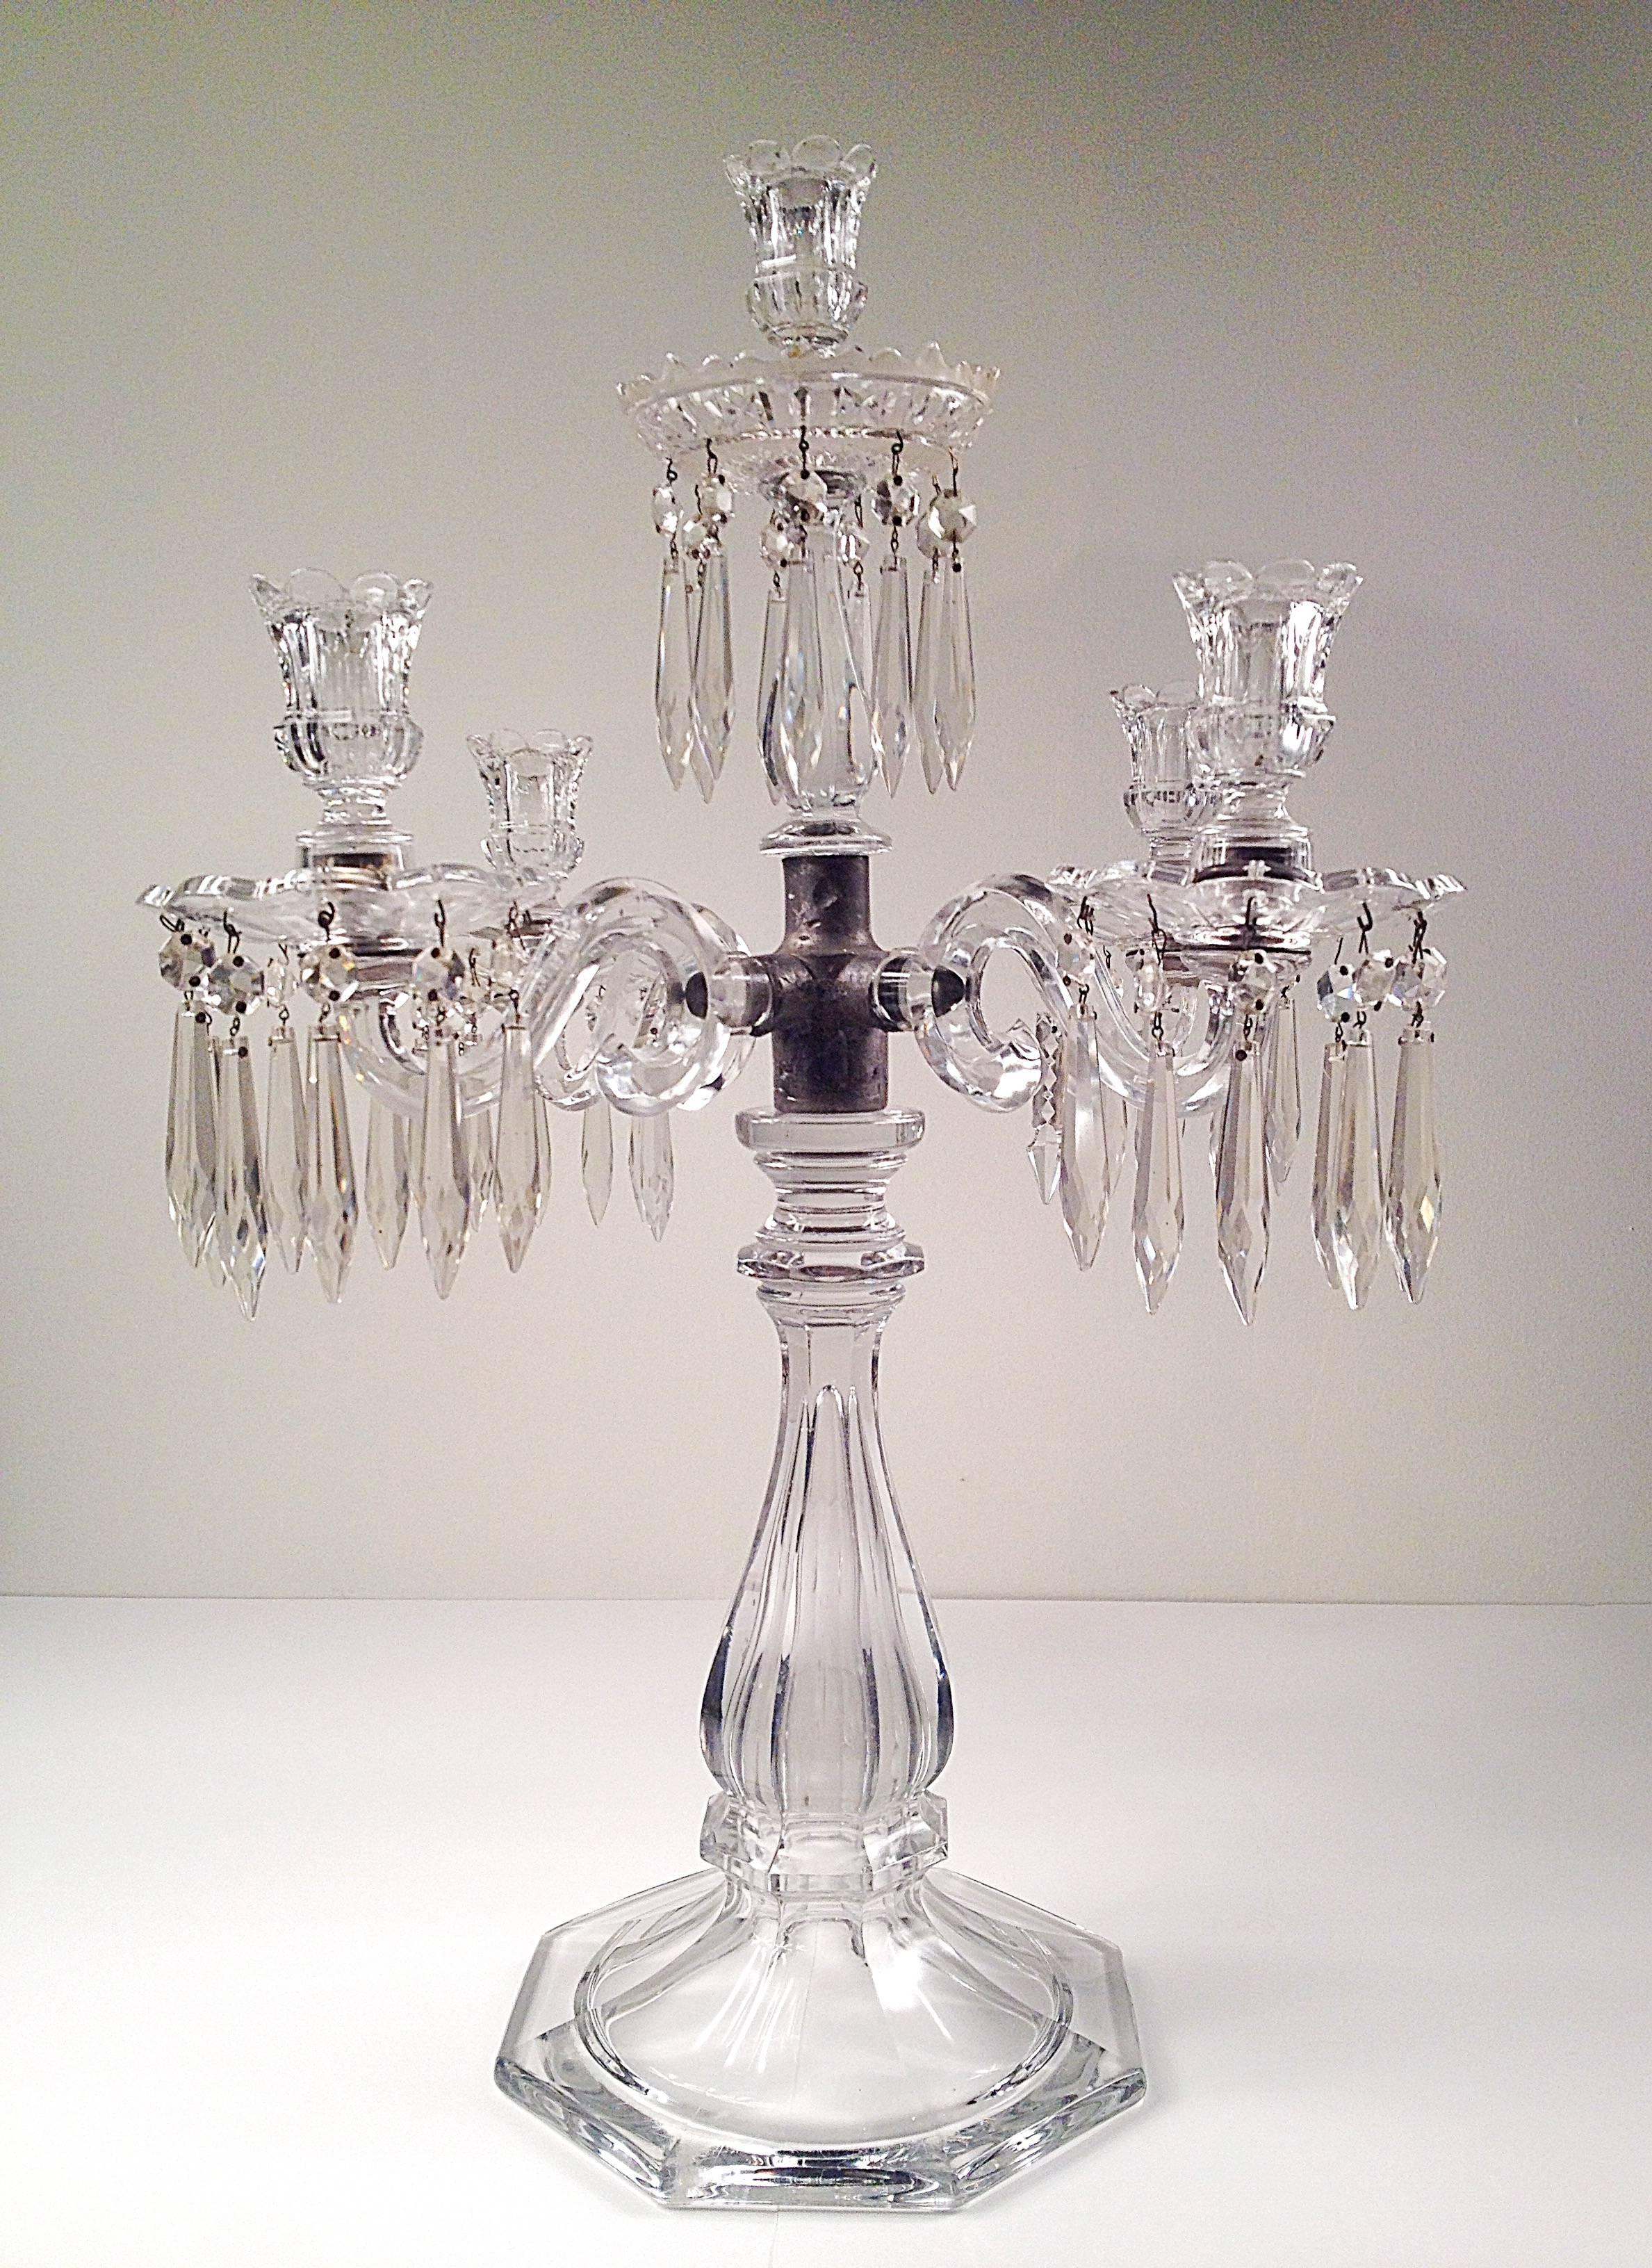 19th century cut-glass candelabra, with five lights and central obelisk, dressed with crystal glass drops.